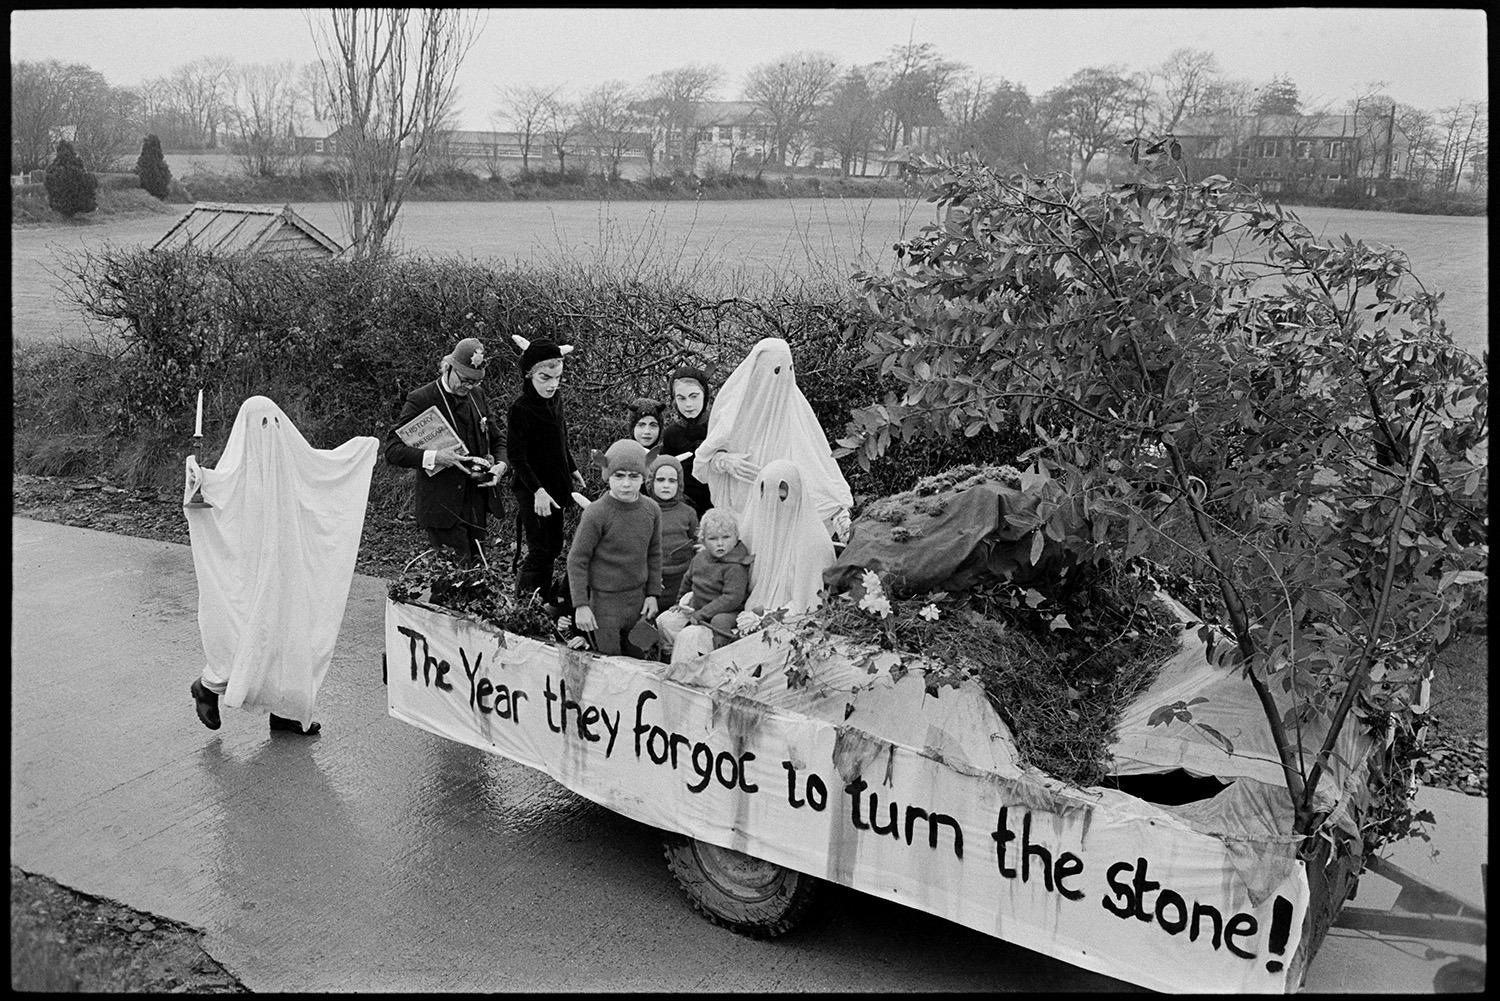 Carnival procession with Queen on decorated float, rain, spectators and Brass Band.
[Children dressed as ghosts and ghouls and a man dressed as a policeman on a carnival float in the Shebbear Carnival. The float is called 'The year they forgot to turn the stone!'.]